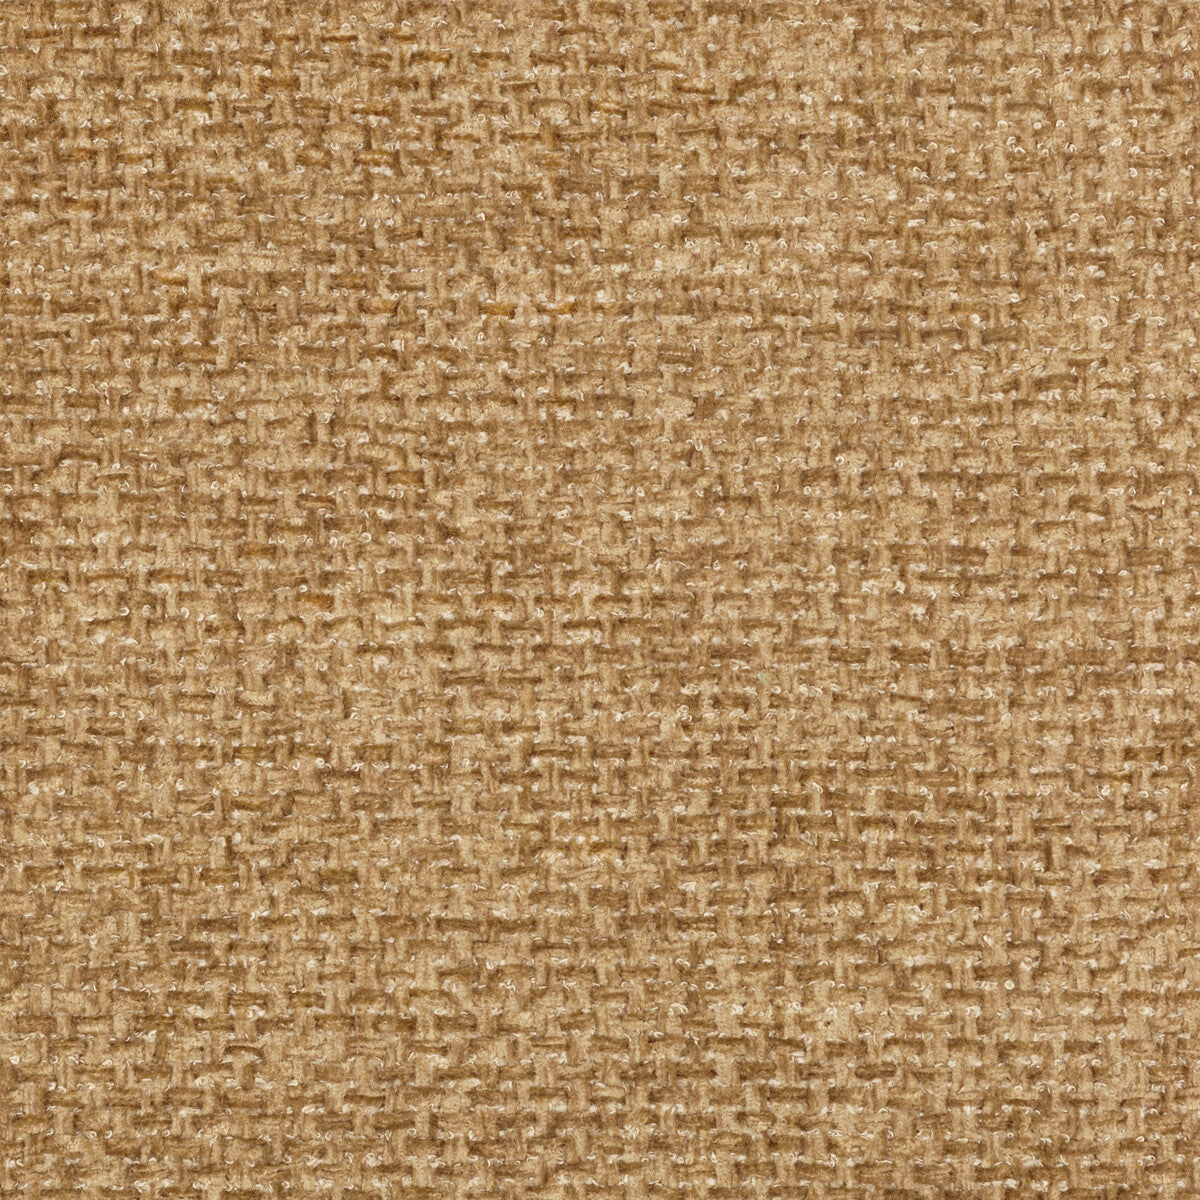 Arly Texture fabric in cafe color - pattern 8019143.6.0 - by Brunschwig &amp; Fils in the Chambery Textures II collection